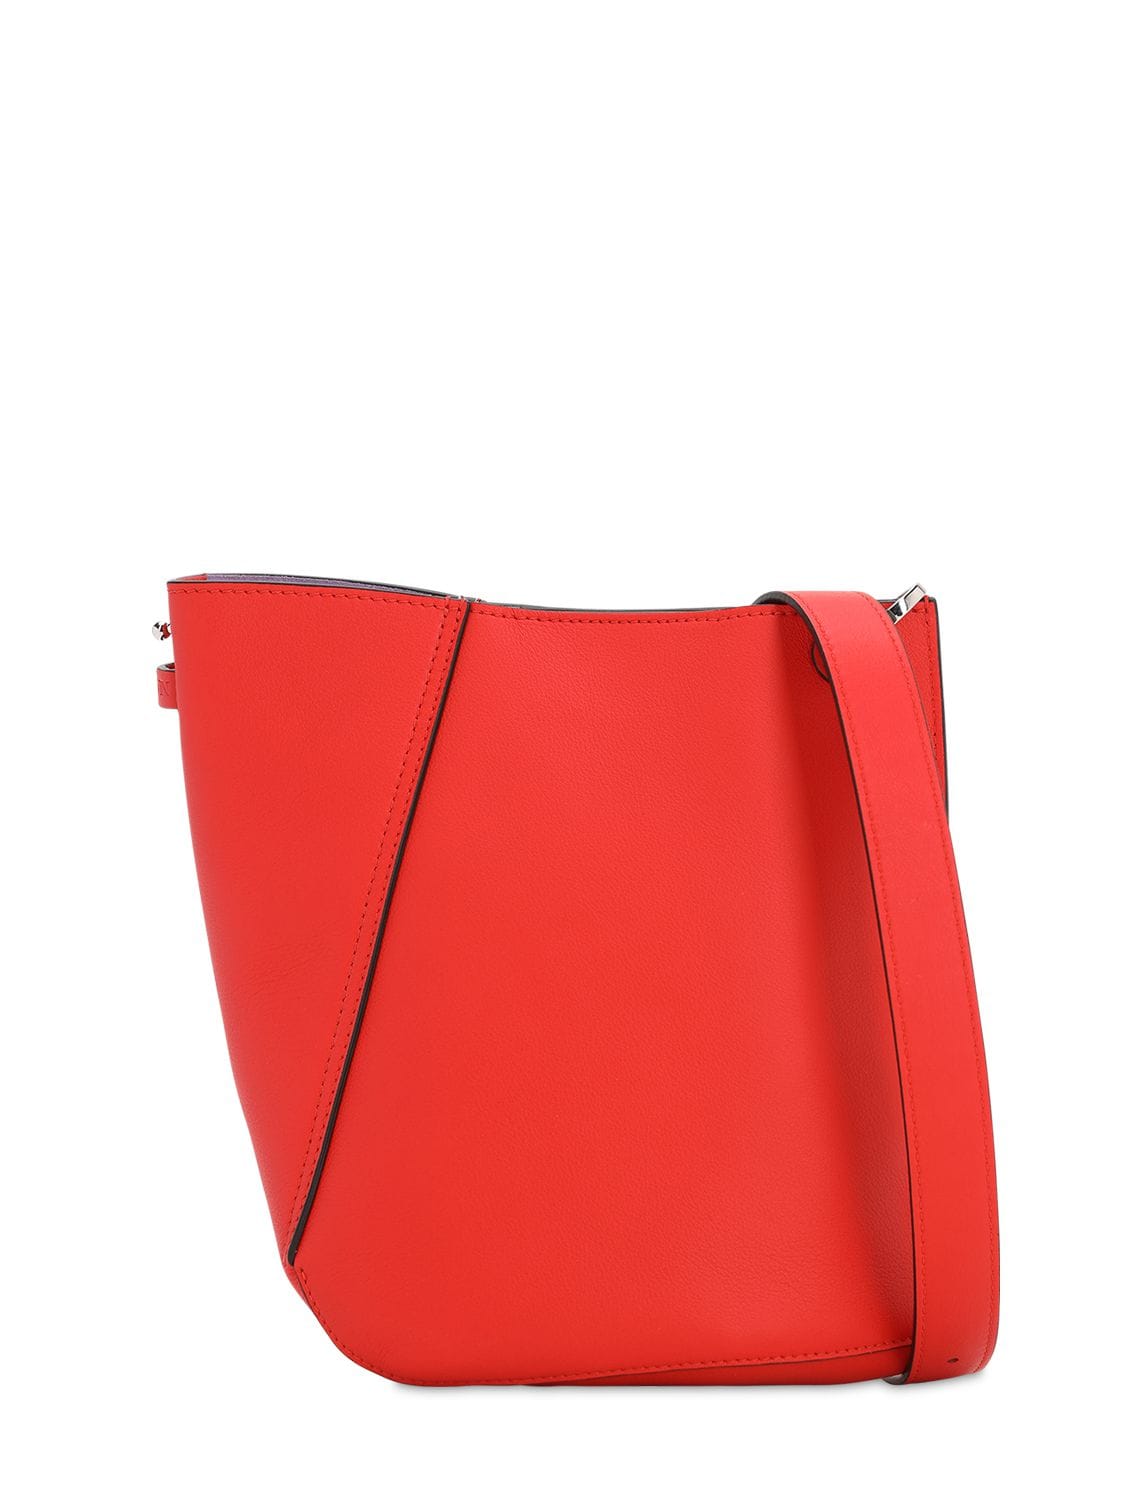 Lanvin Small Asymmetrical Leather Bucket Bag In Red